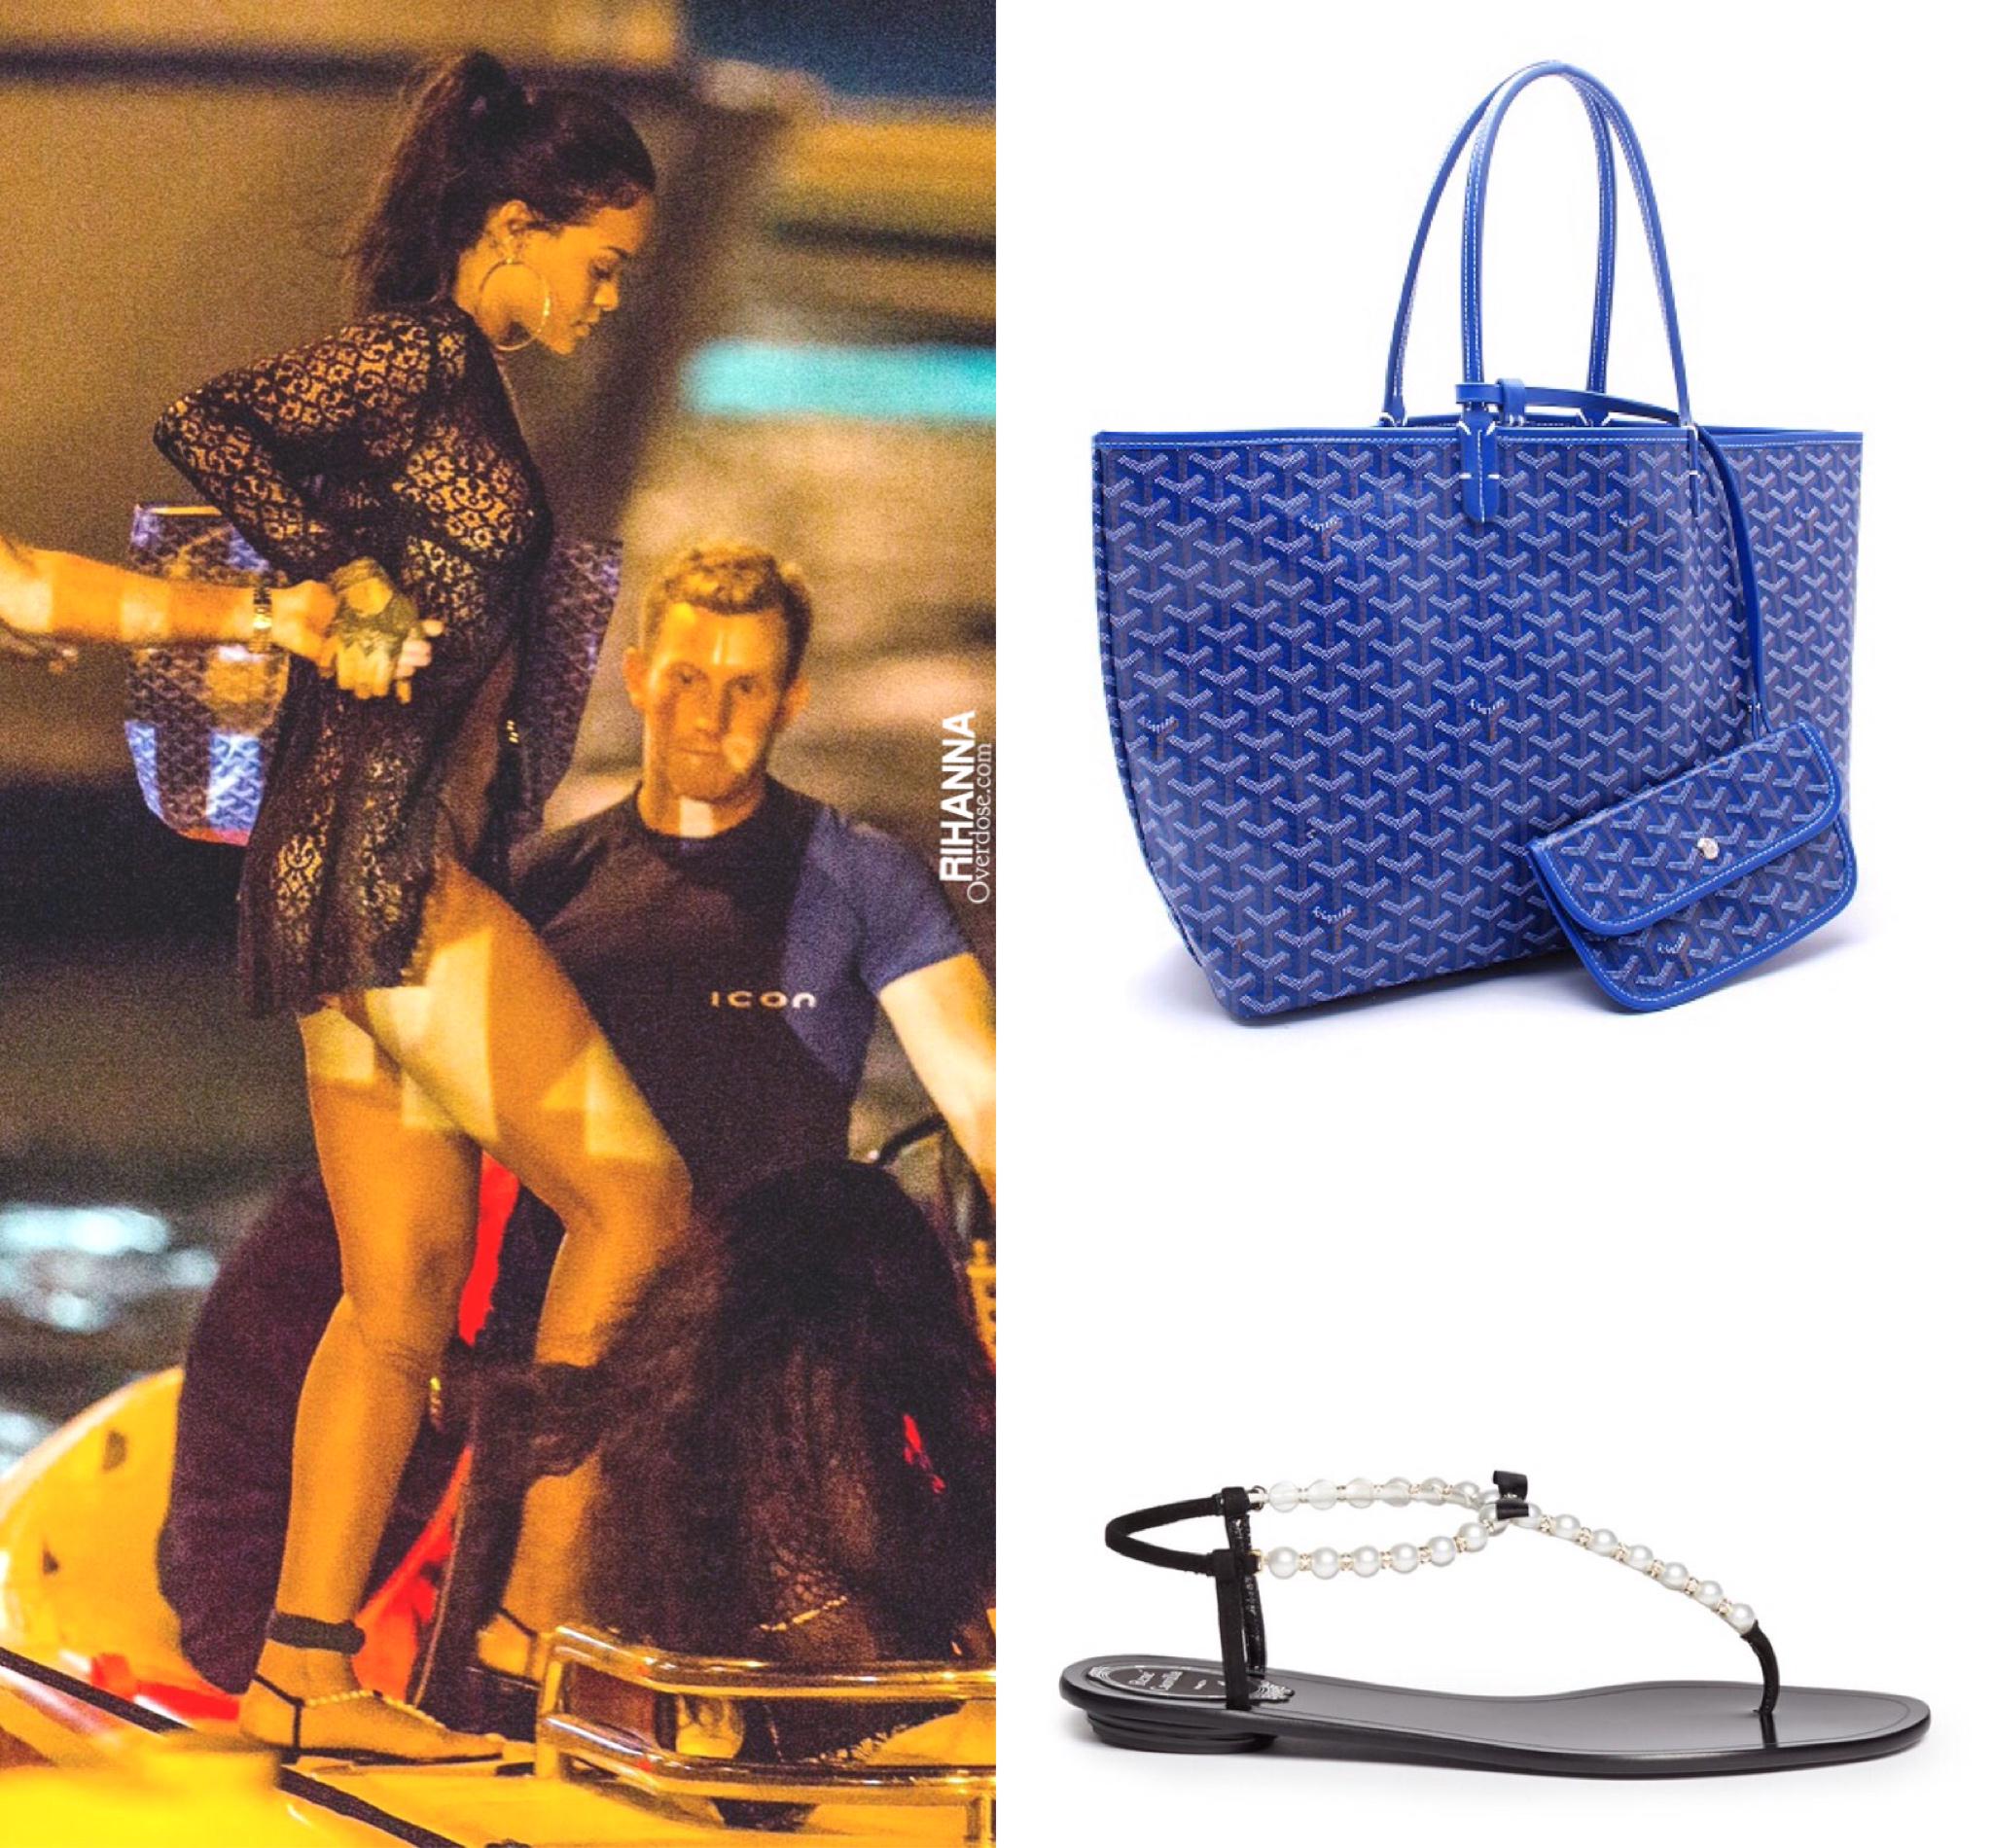 KYRA on X: Rihanna was spotted in Saint Barthélemy sporting a